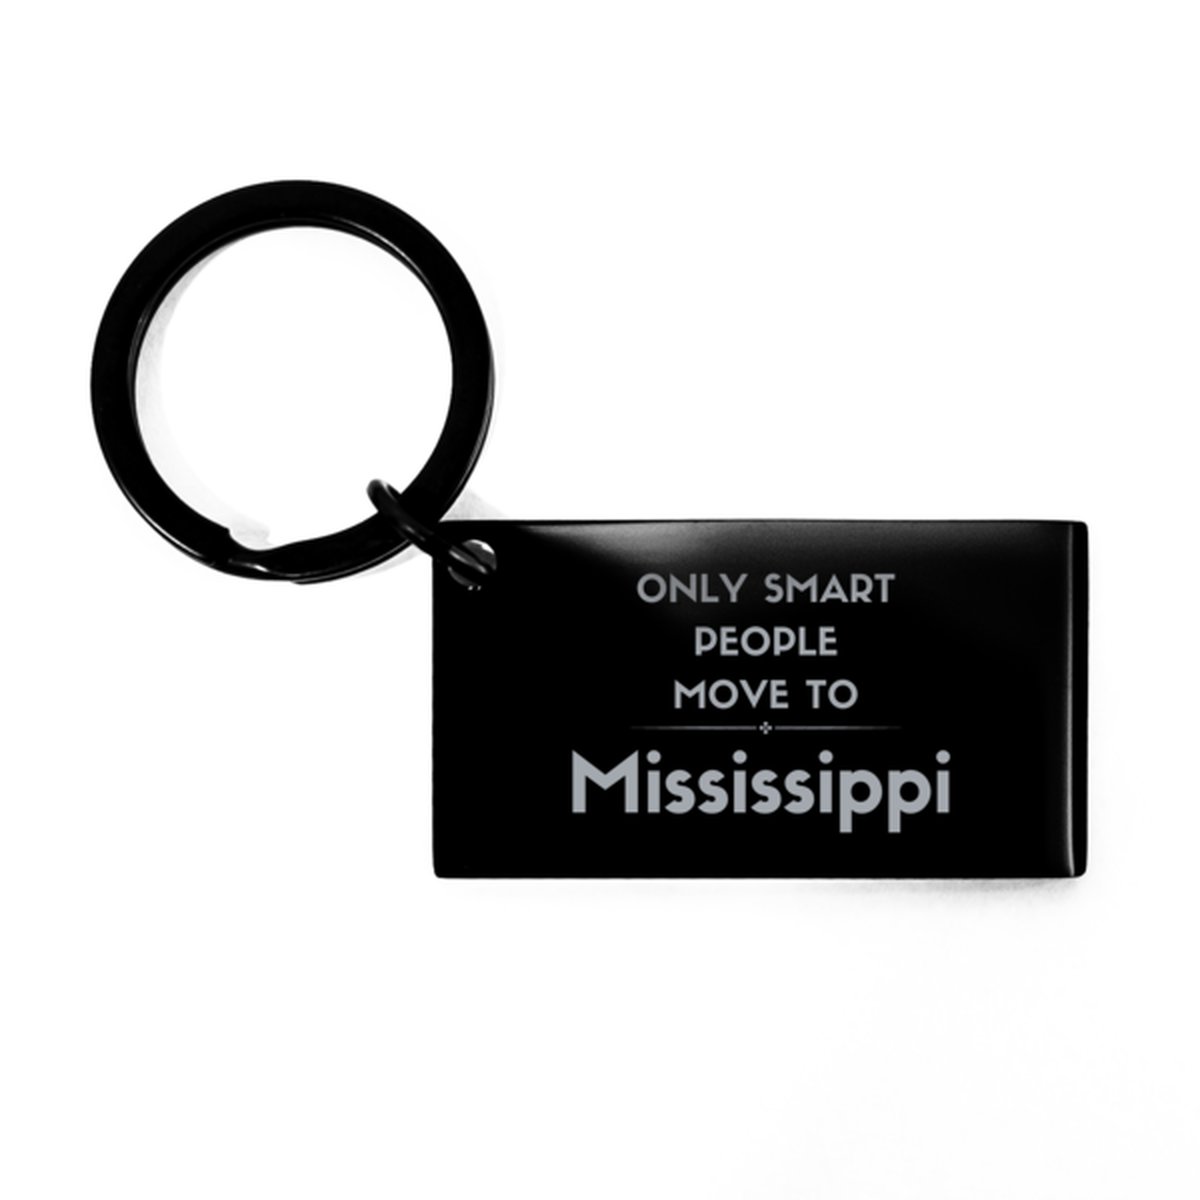 Only smart people move to Mississippi Keychain, Gag Gifts For Mississippi, Move to Mississippi Gifts for Friends Coworker Funny Saying Quote